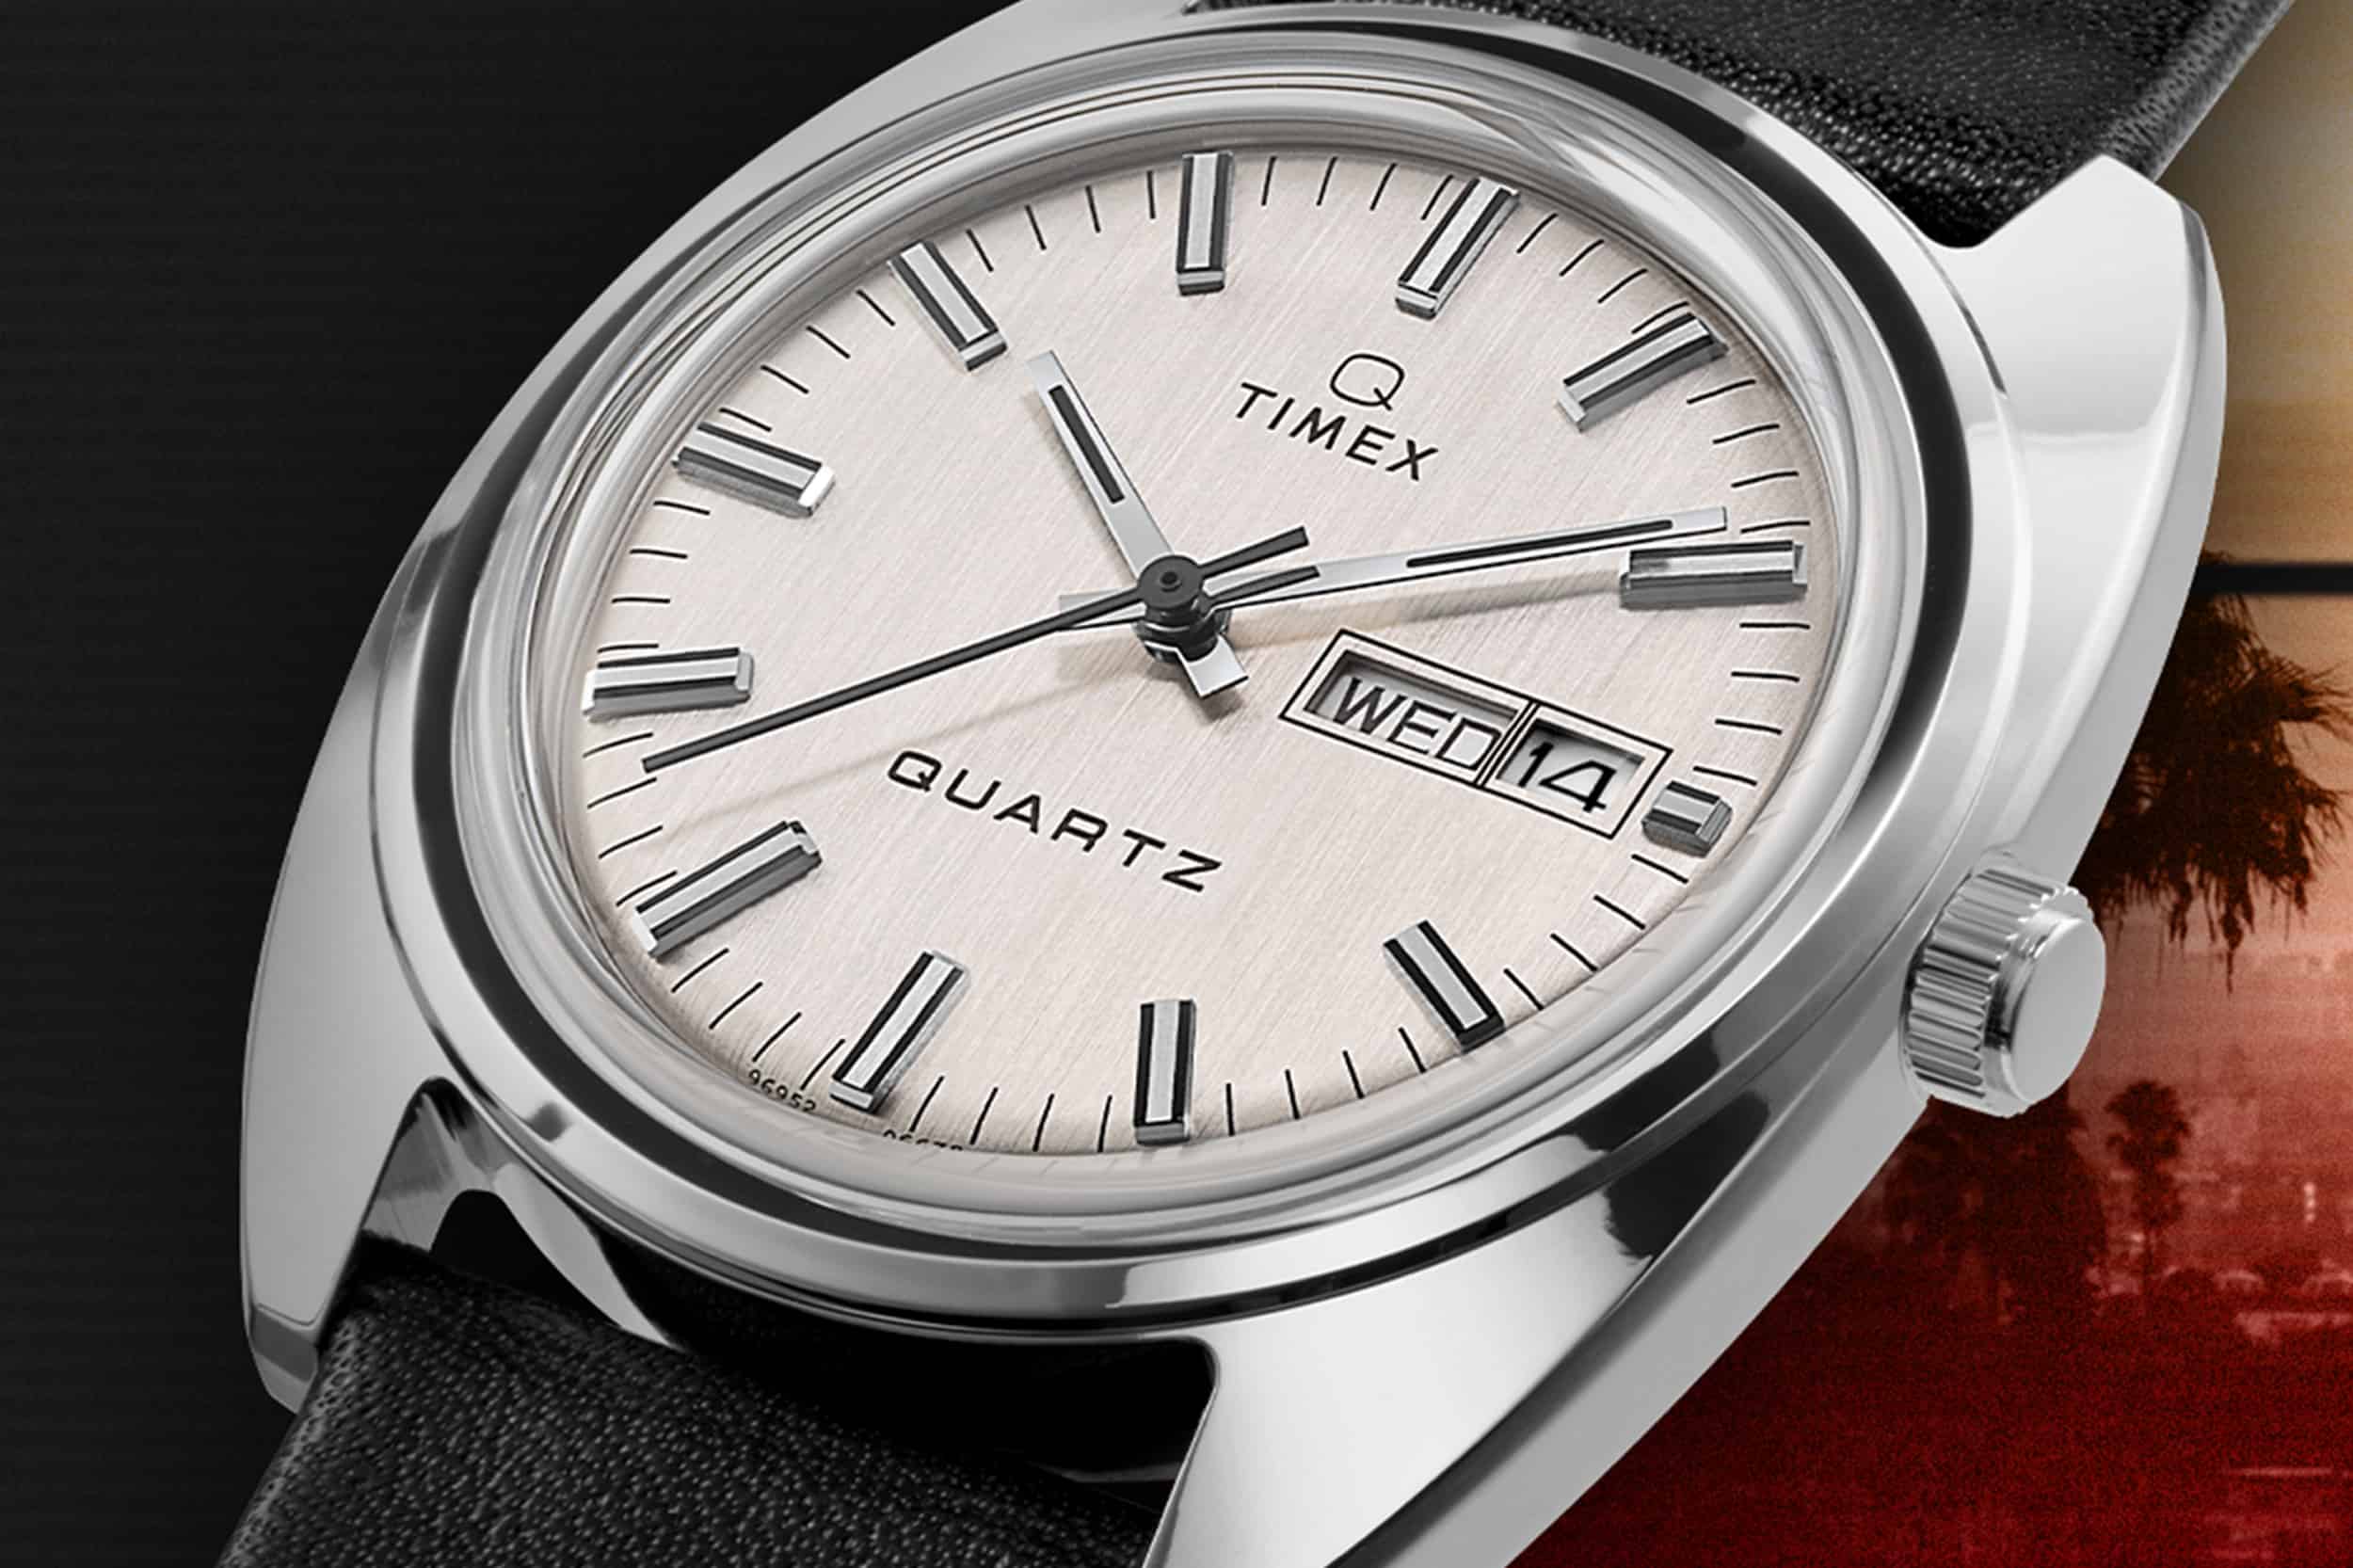 Introducing the Q Timex 1978 Reissue